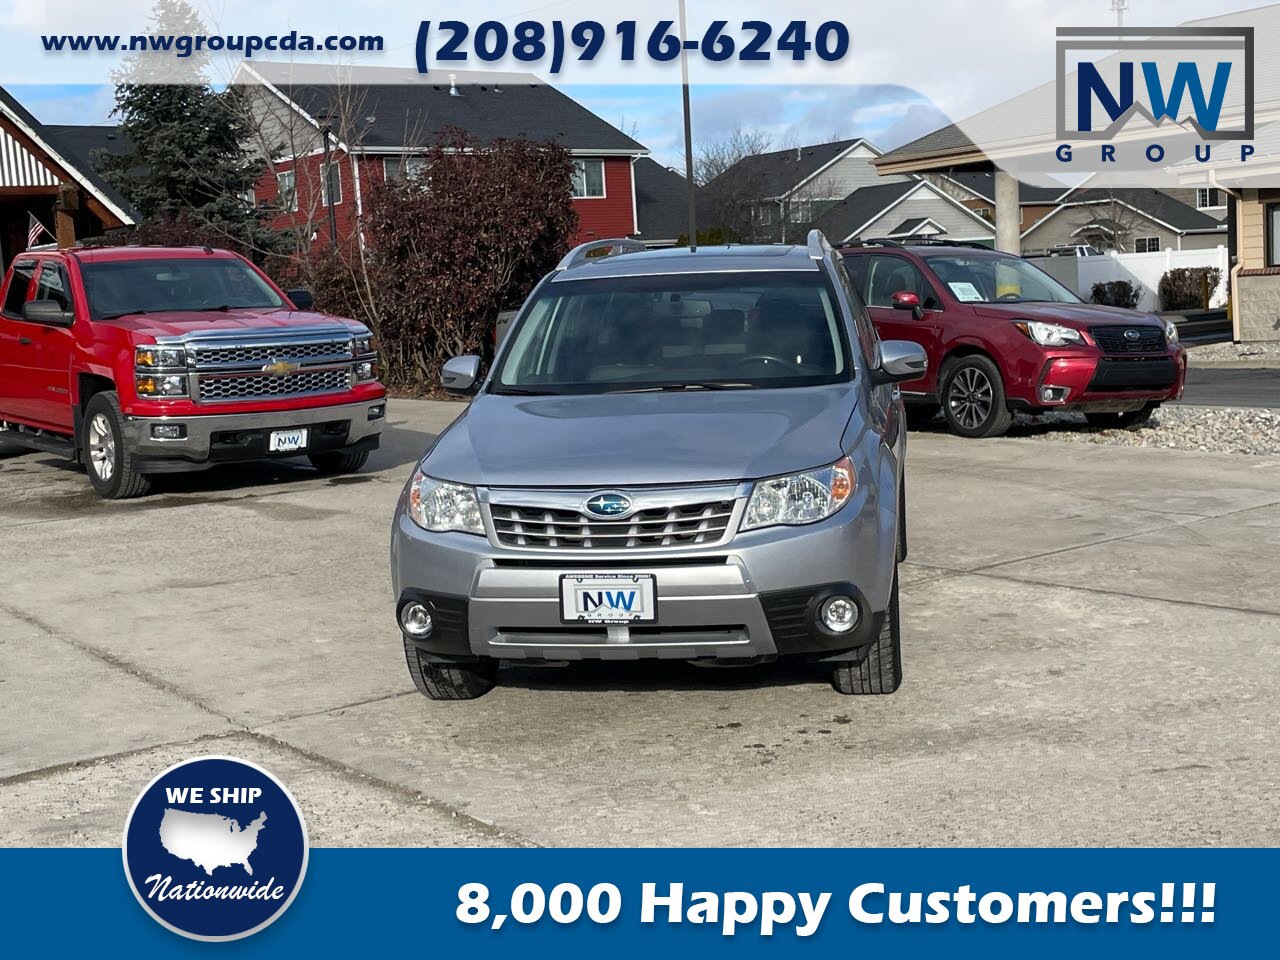 2013 Subaru Forester 2.5X Touring Package  Original 37k miles, AWD, Leather, Amazing! - Photo 3 - Post Falls, ID 83854